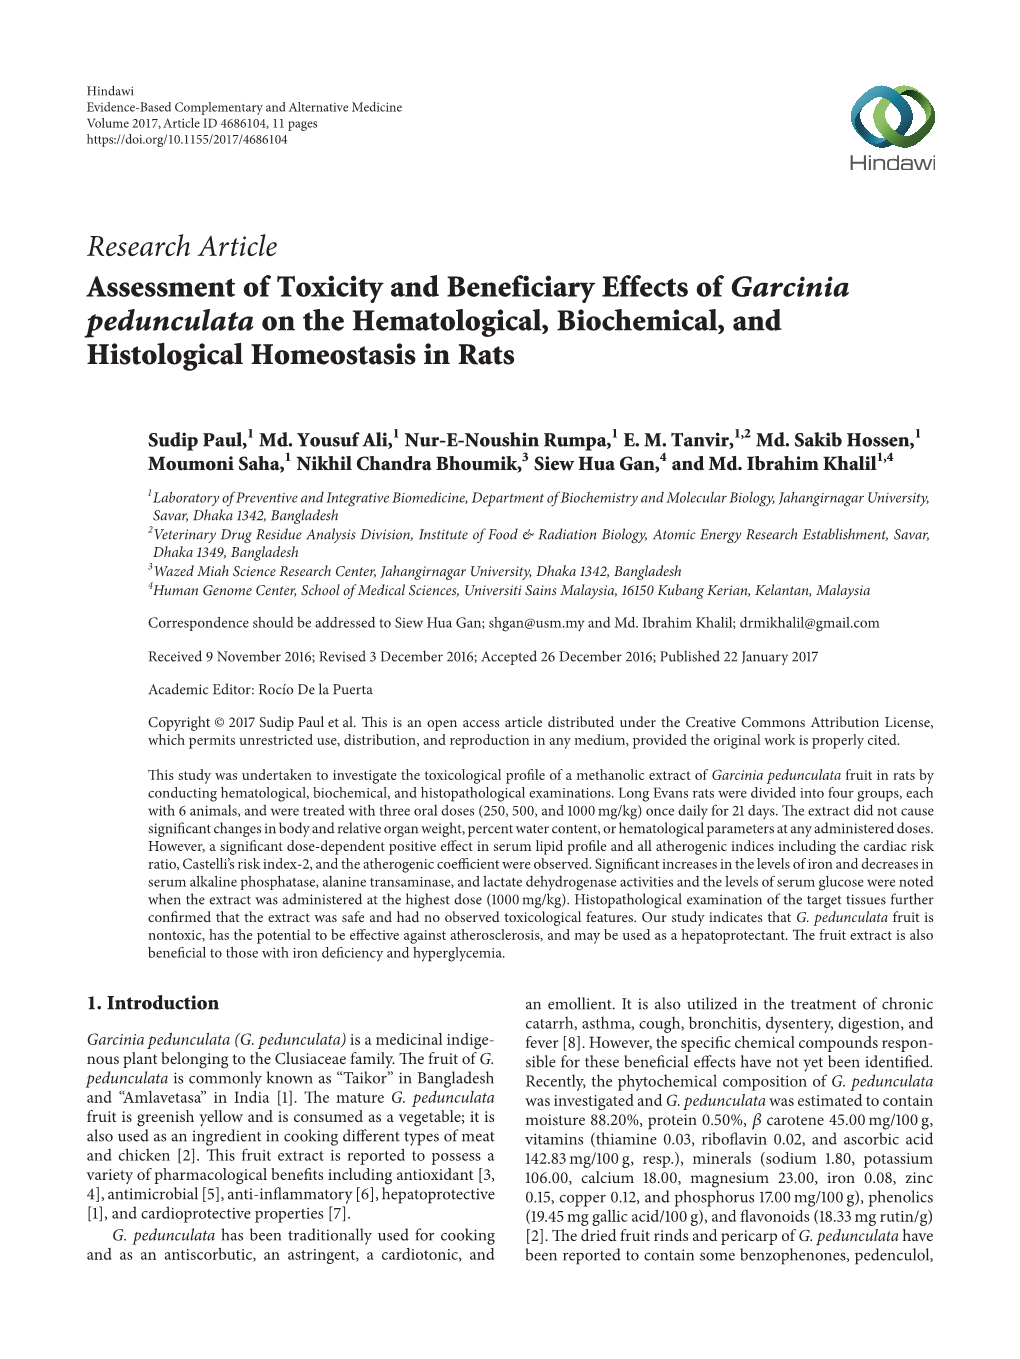 Assessment of Toxicity and Beneficiary Effects of Garcinia Pedunculata on the Hematological, Biochemical, and Histological Homeostasis in Rats